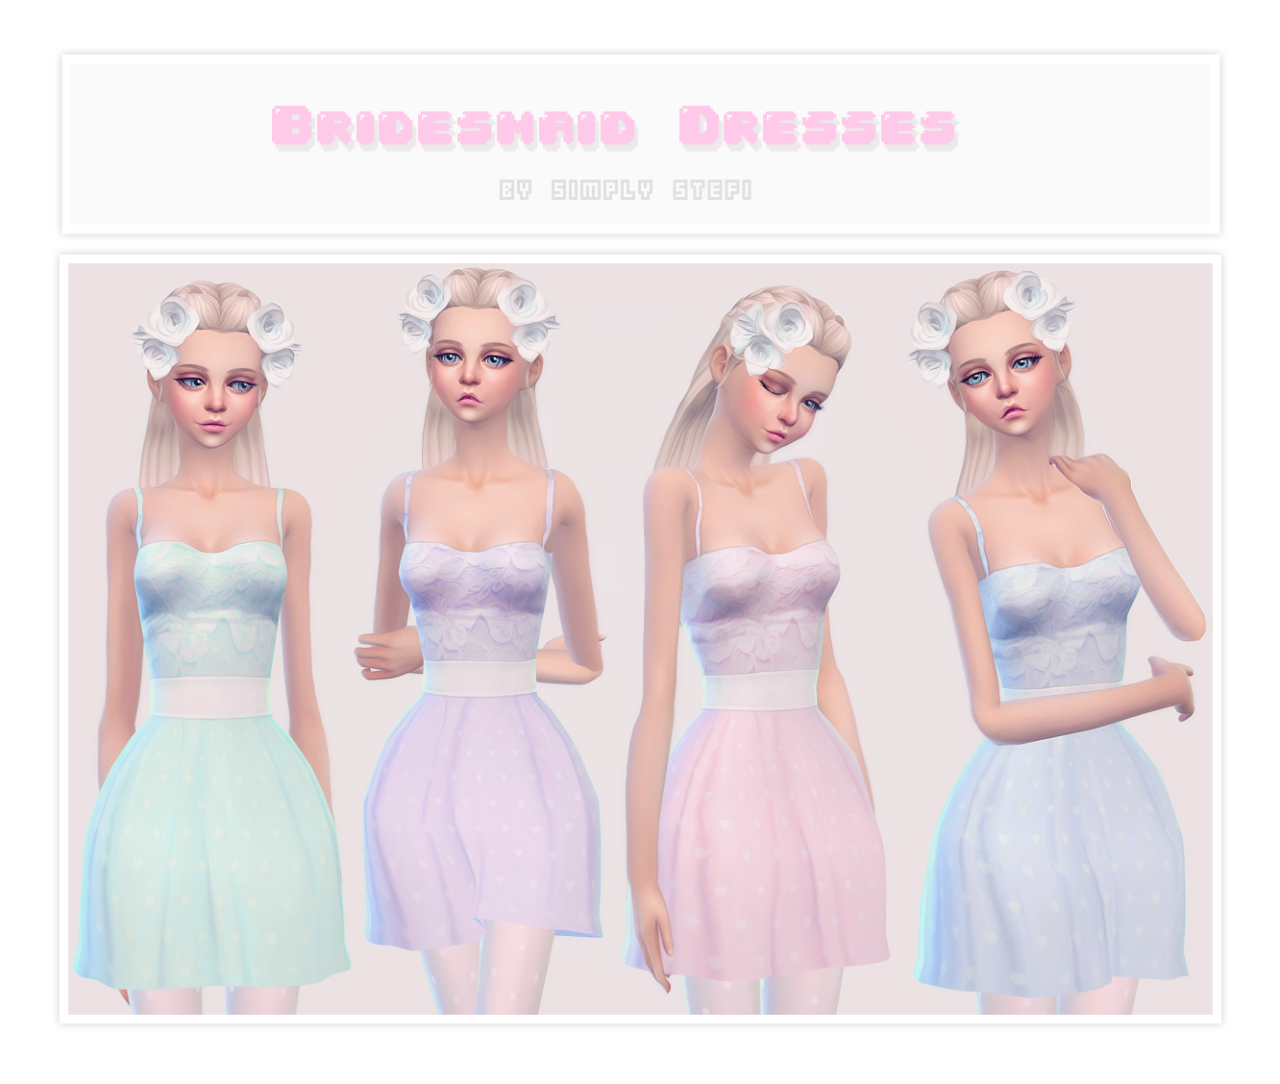 Sims 4 CC's - The Best: Dress by Simplystefi